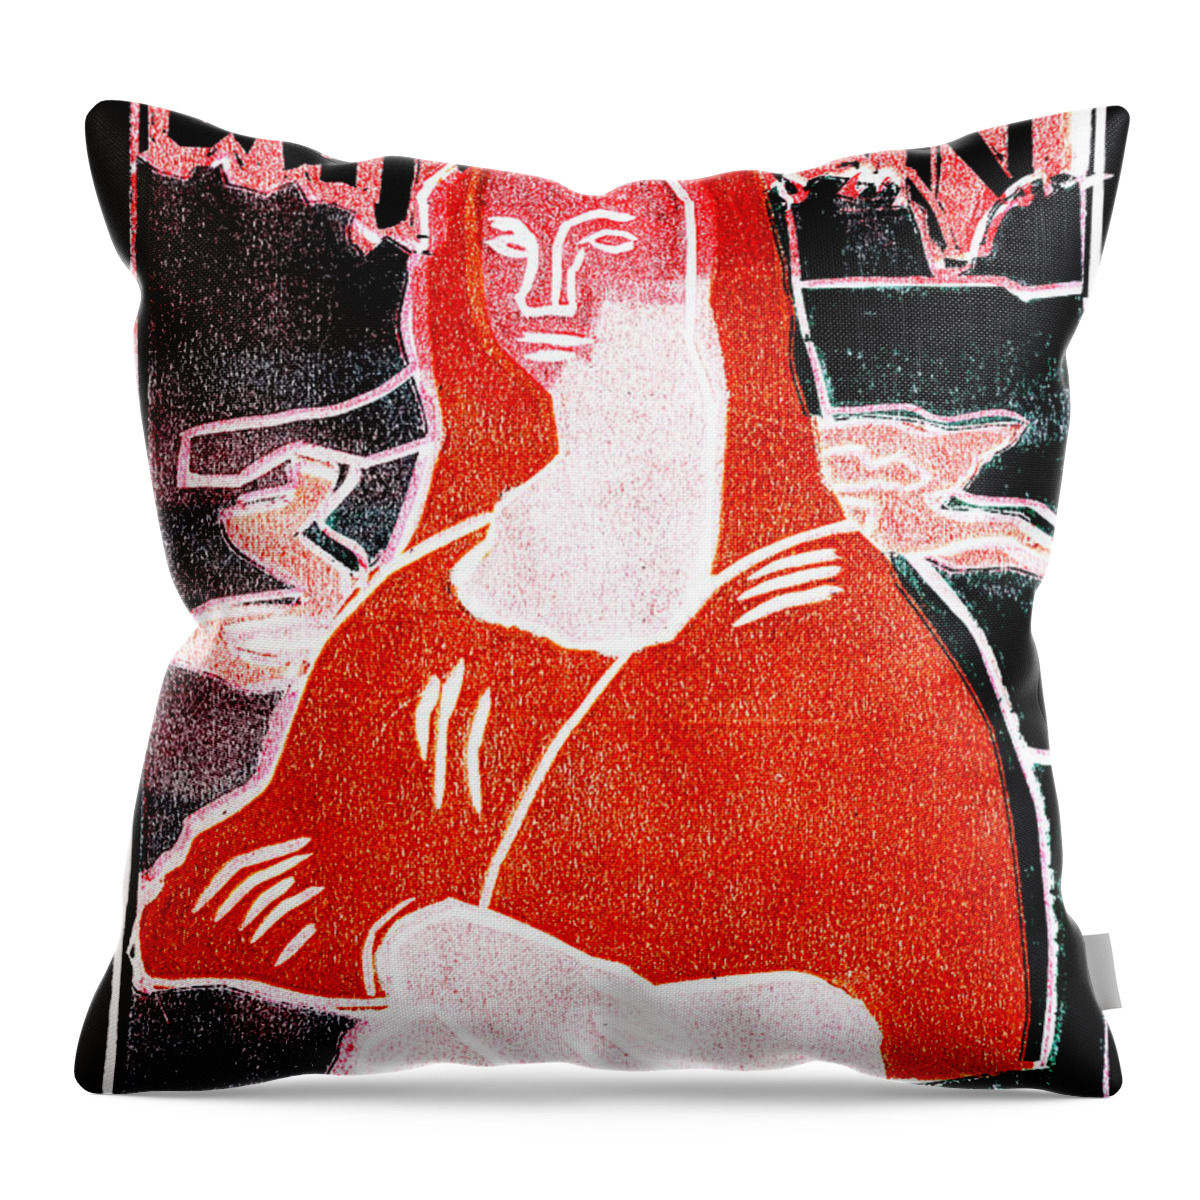 Mona Lisa Throw Pillow featuring the relief Black Ivory Mona Lisa 16 by Edgeworth Johnstone